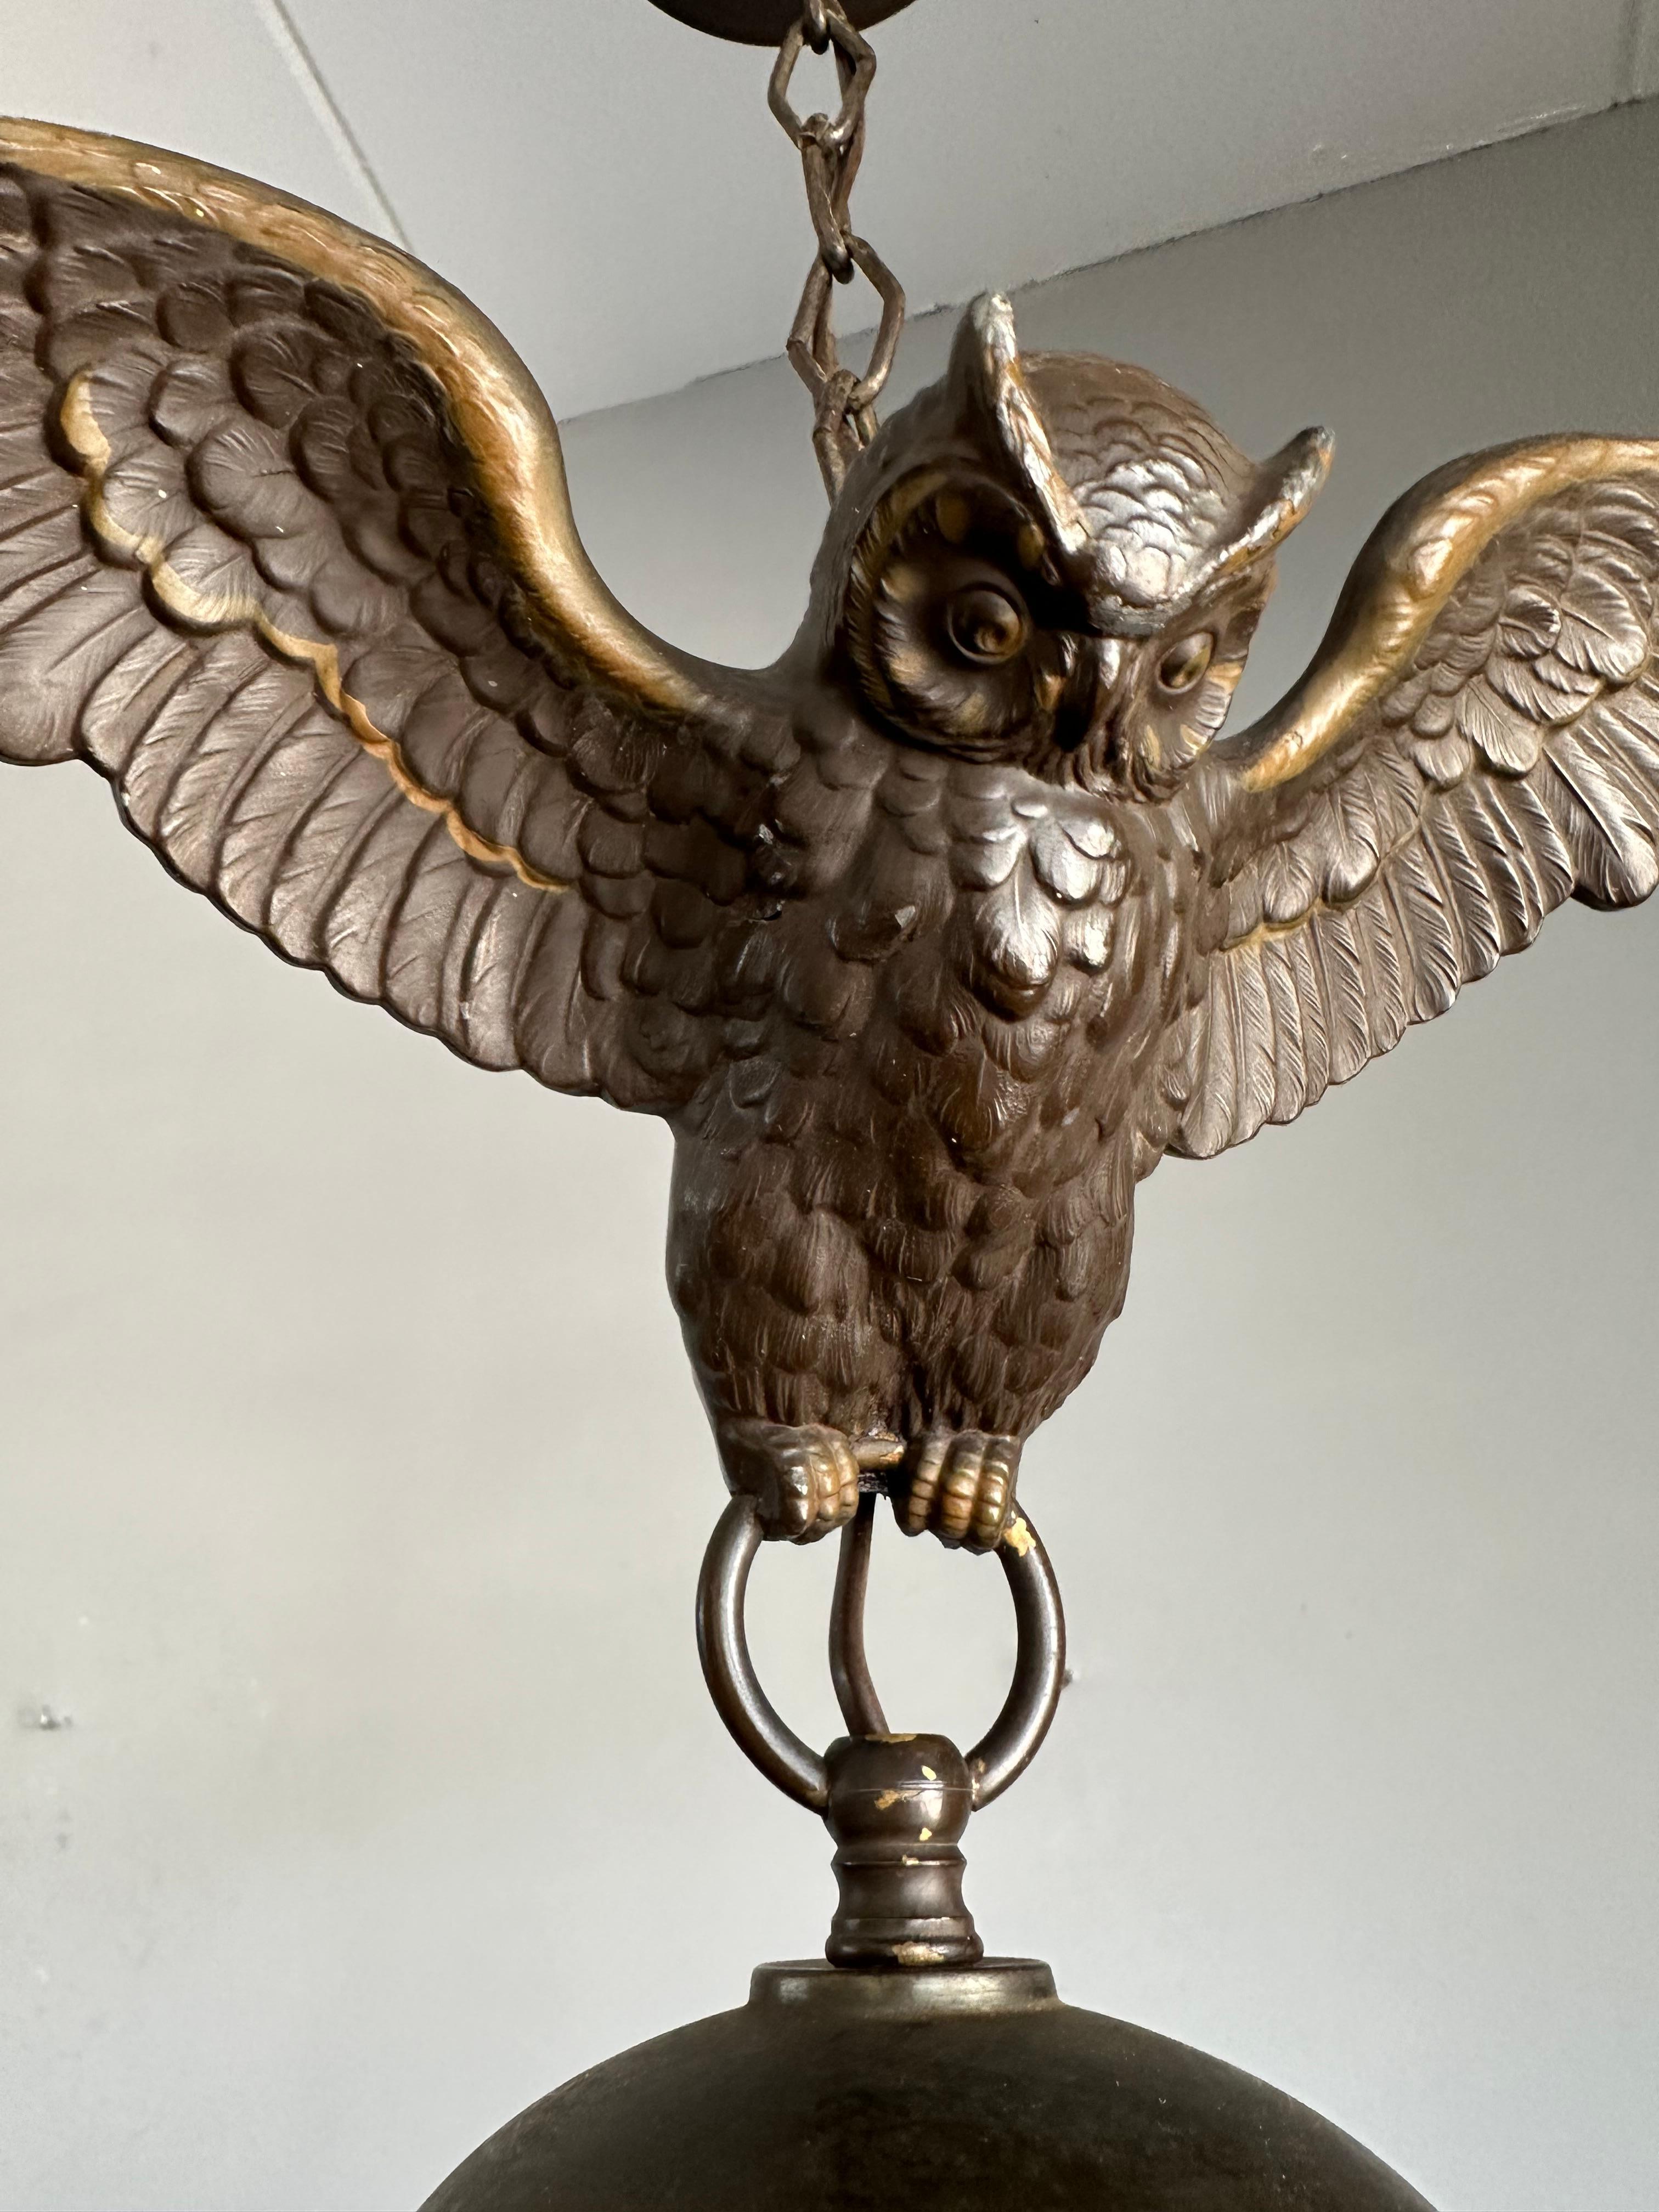 Arts and Crafts Era Flying Owl Sculpture Pendant Light or Lantern with Cut Glass For Sale 1